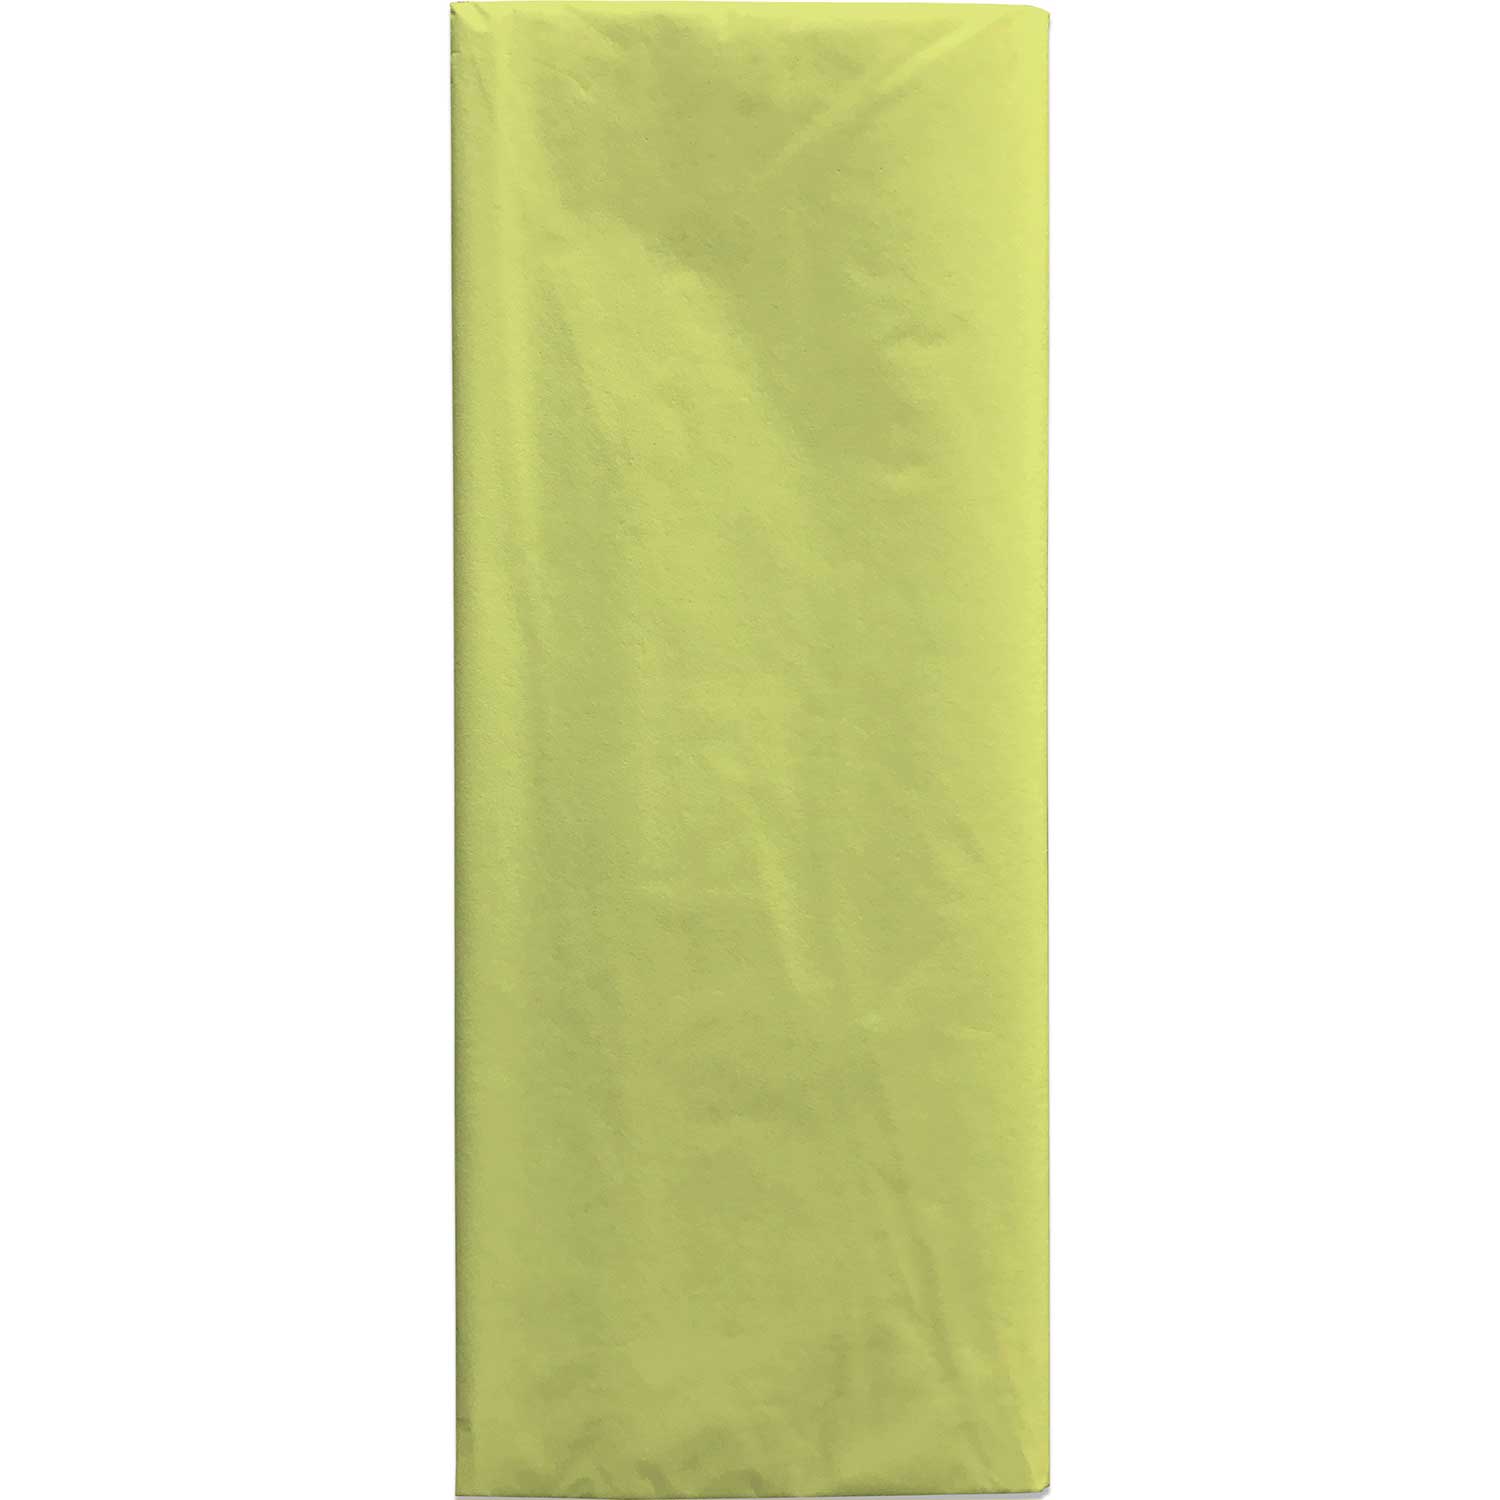 Yellow Tissue Paper (480 Sheets)